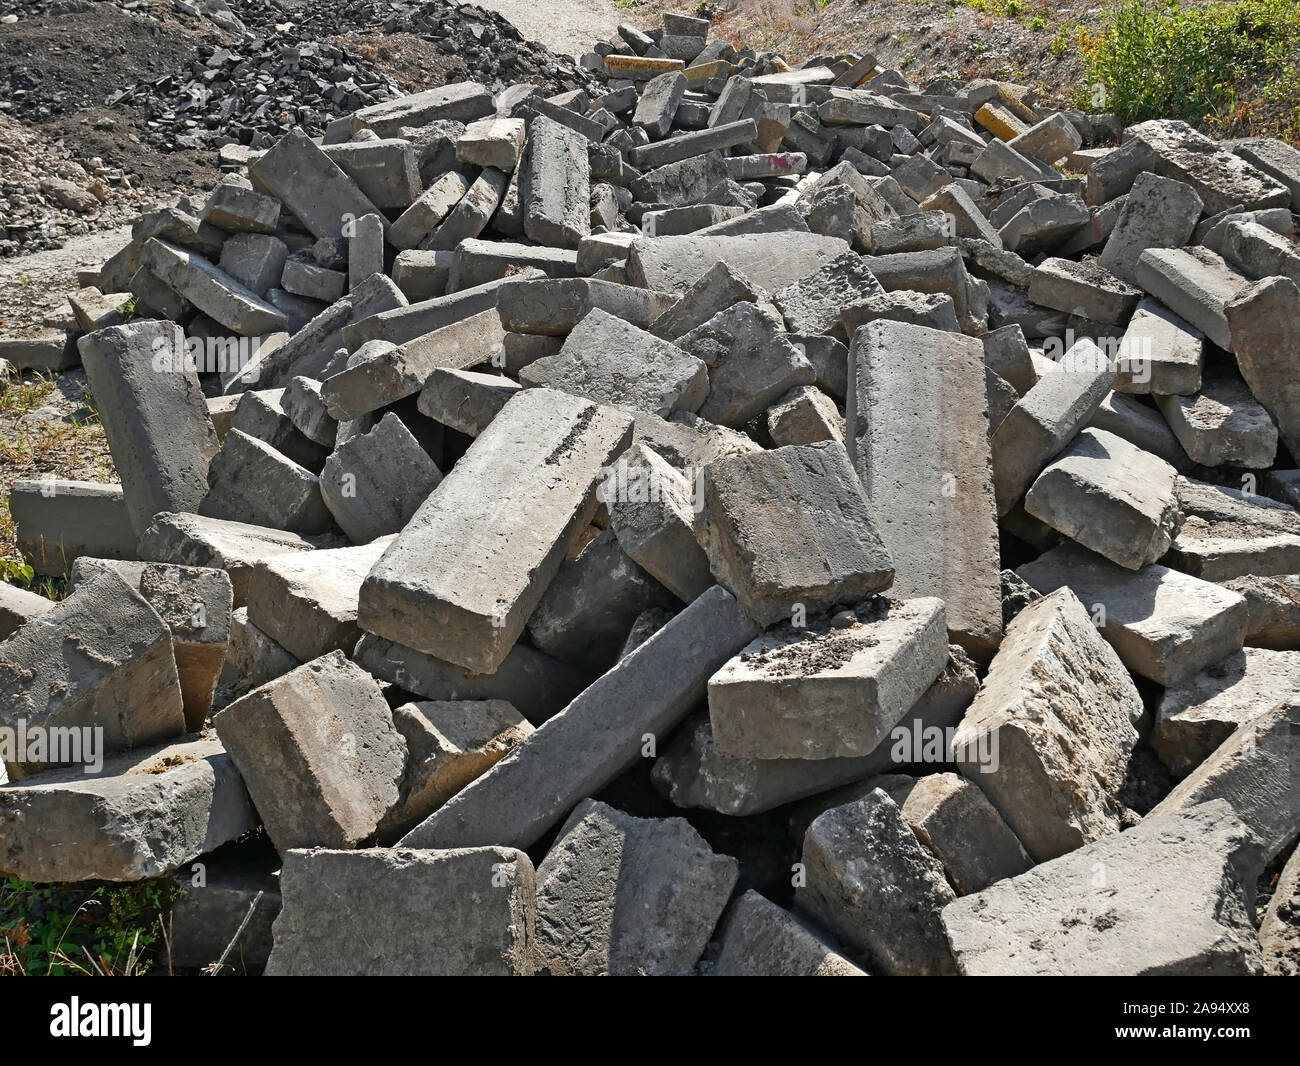 Large pile of old broken concrete blocks that were used in road